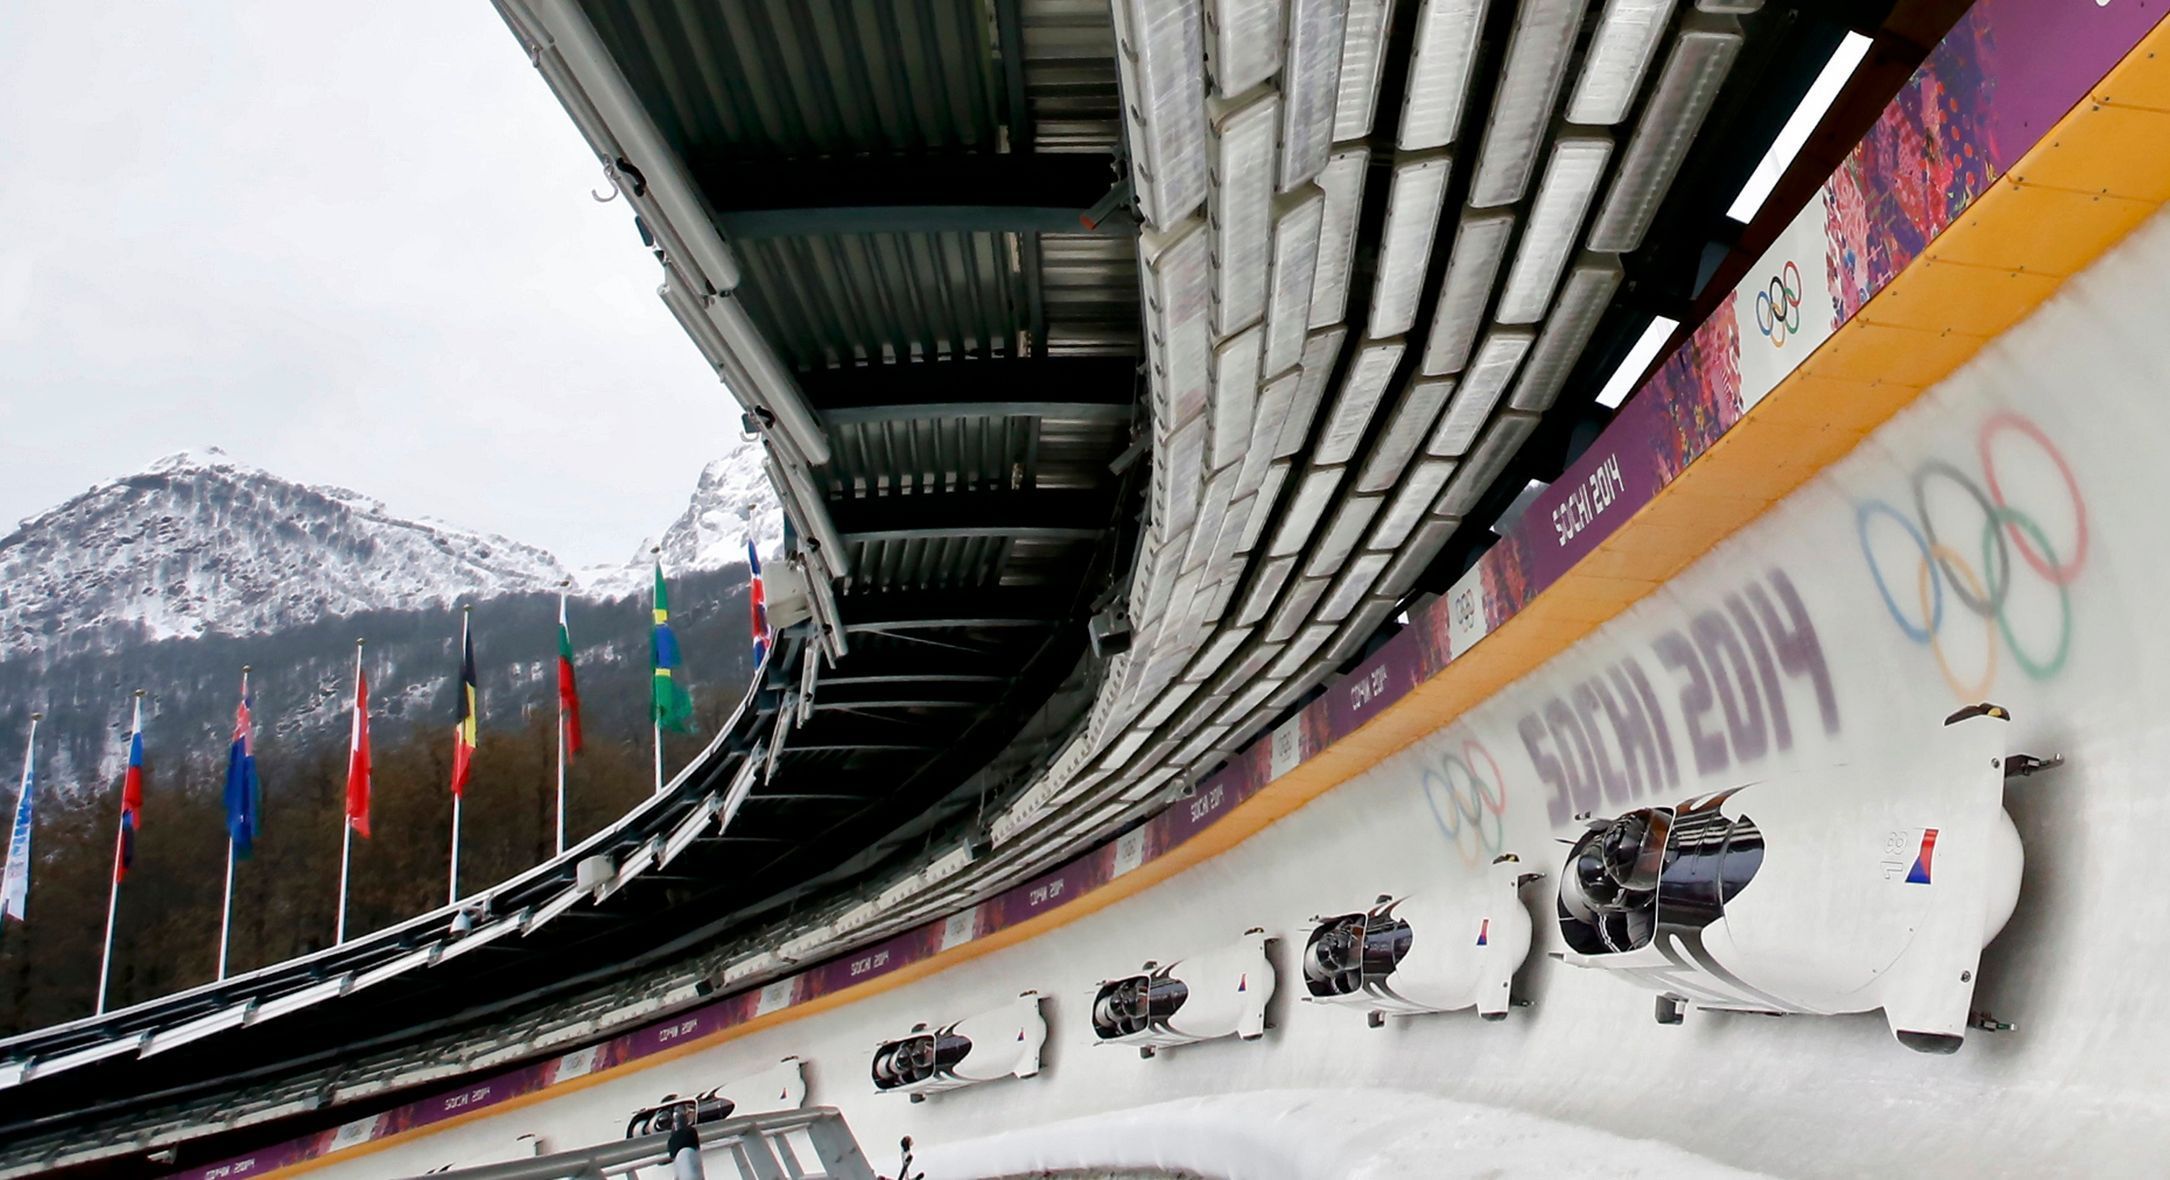 Pilot Vrba of the Czech Republic and his teammates speed down the track during a four-man bobsleigh training session during the Sochi 2014 Winter Olympics